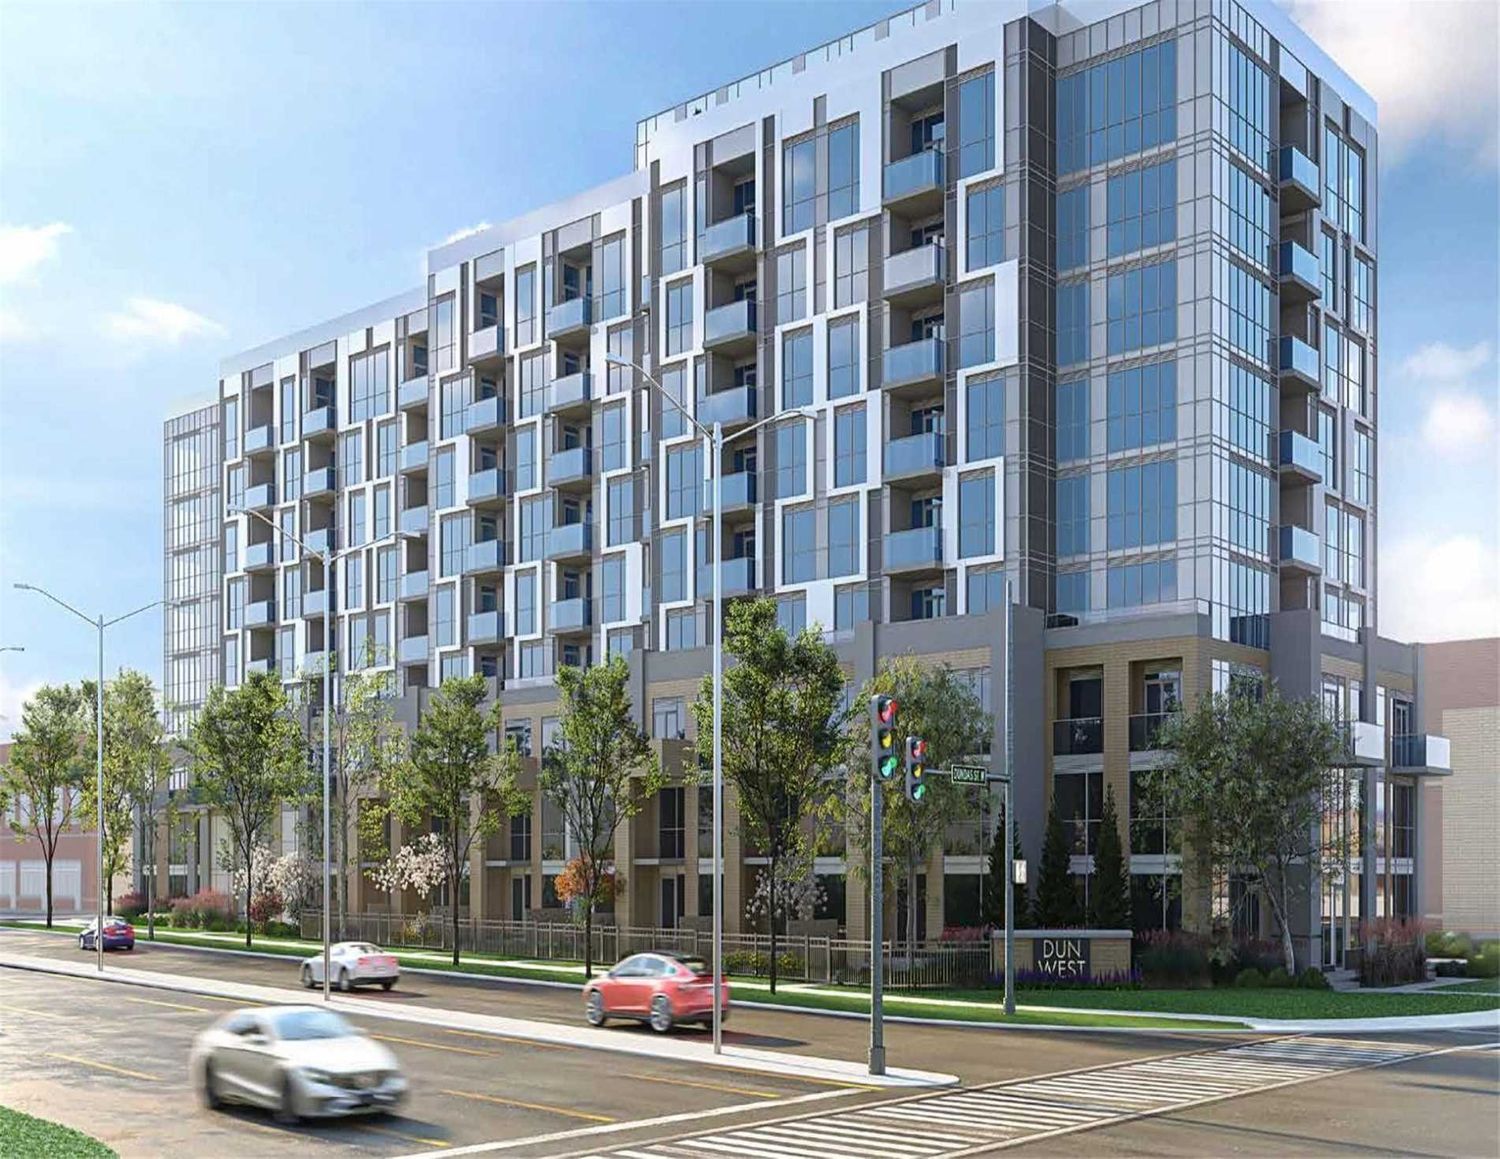 509 Dundas Street W. Dunwest Condos is located in  Oakville, Toronto - image #2 of 2